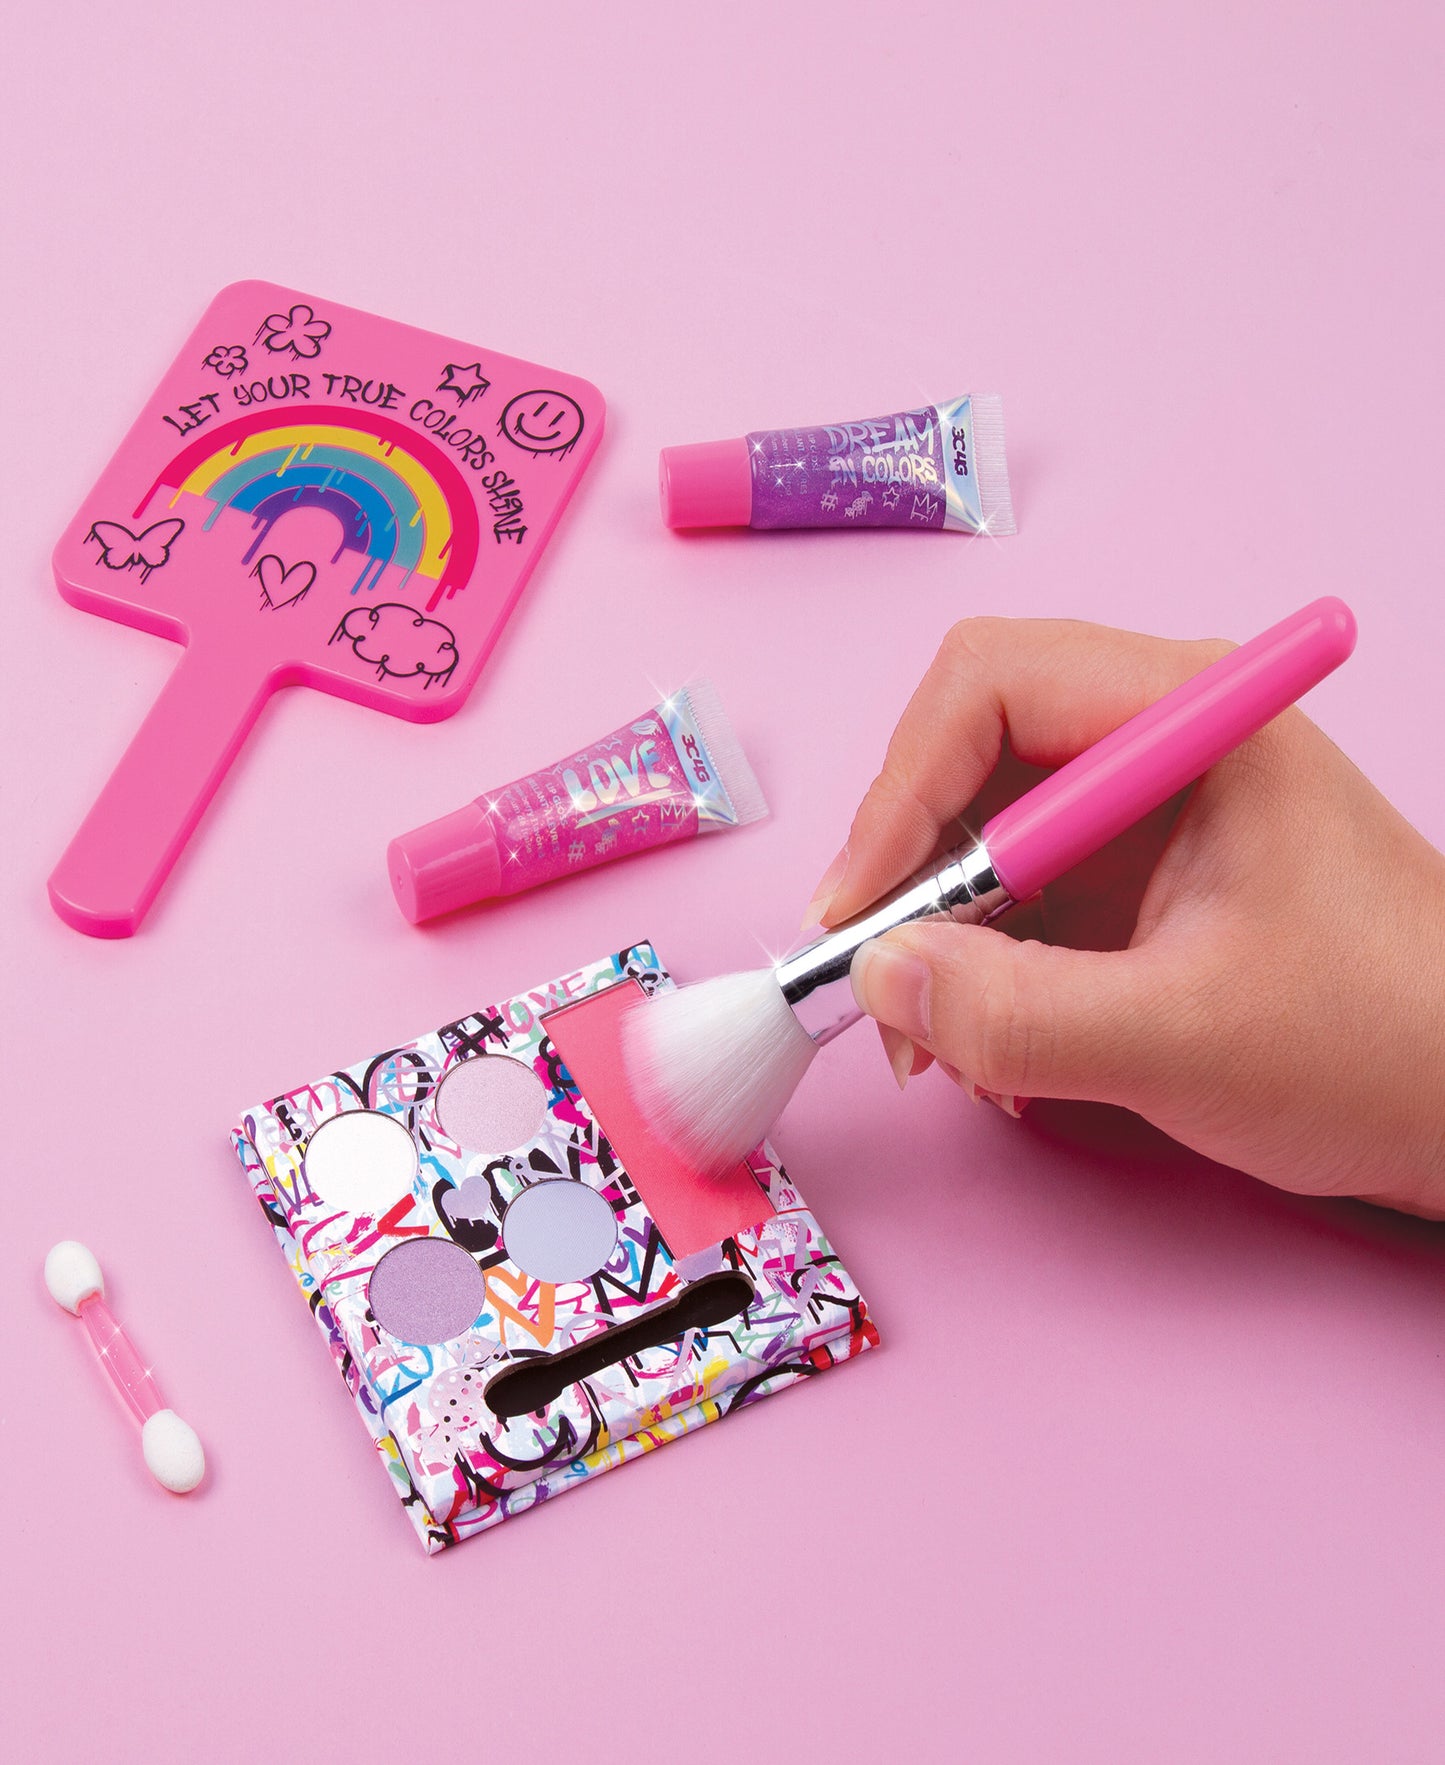 Three Cheers For Girls Graffiti Cosmetic Set with Mirror - Colorful Makeup Kit